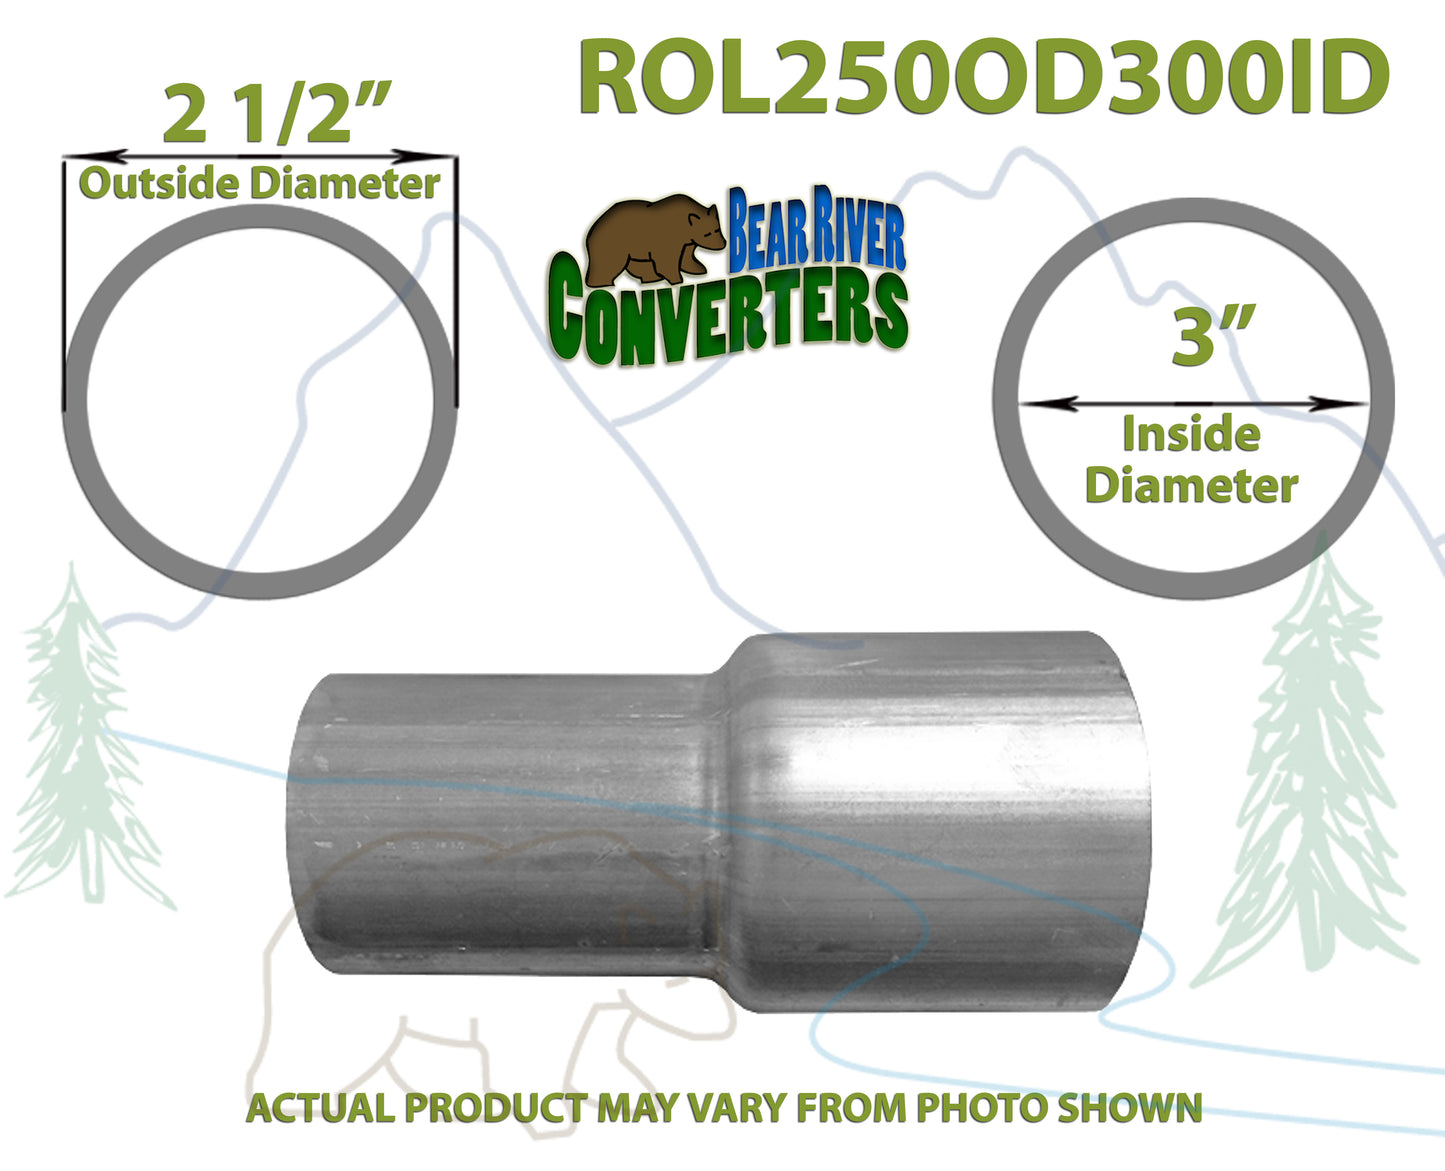 ROL250OD300ID 617571 Exhaust Pipe Adapter Reducer - Connect 2.5" ( 2 1/2 ) ID Pipe to 3" OD Pipe